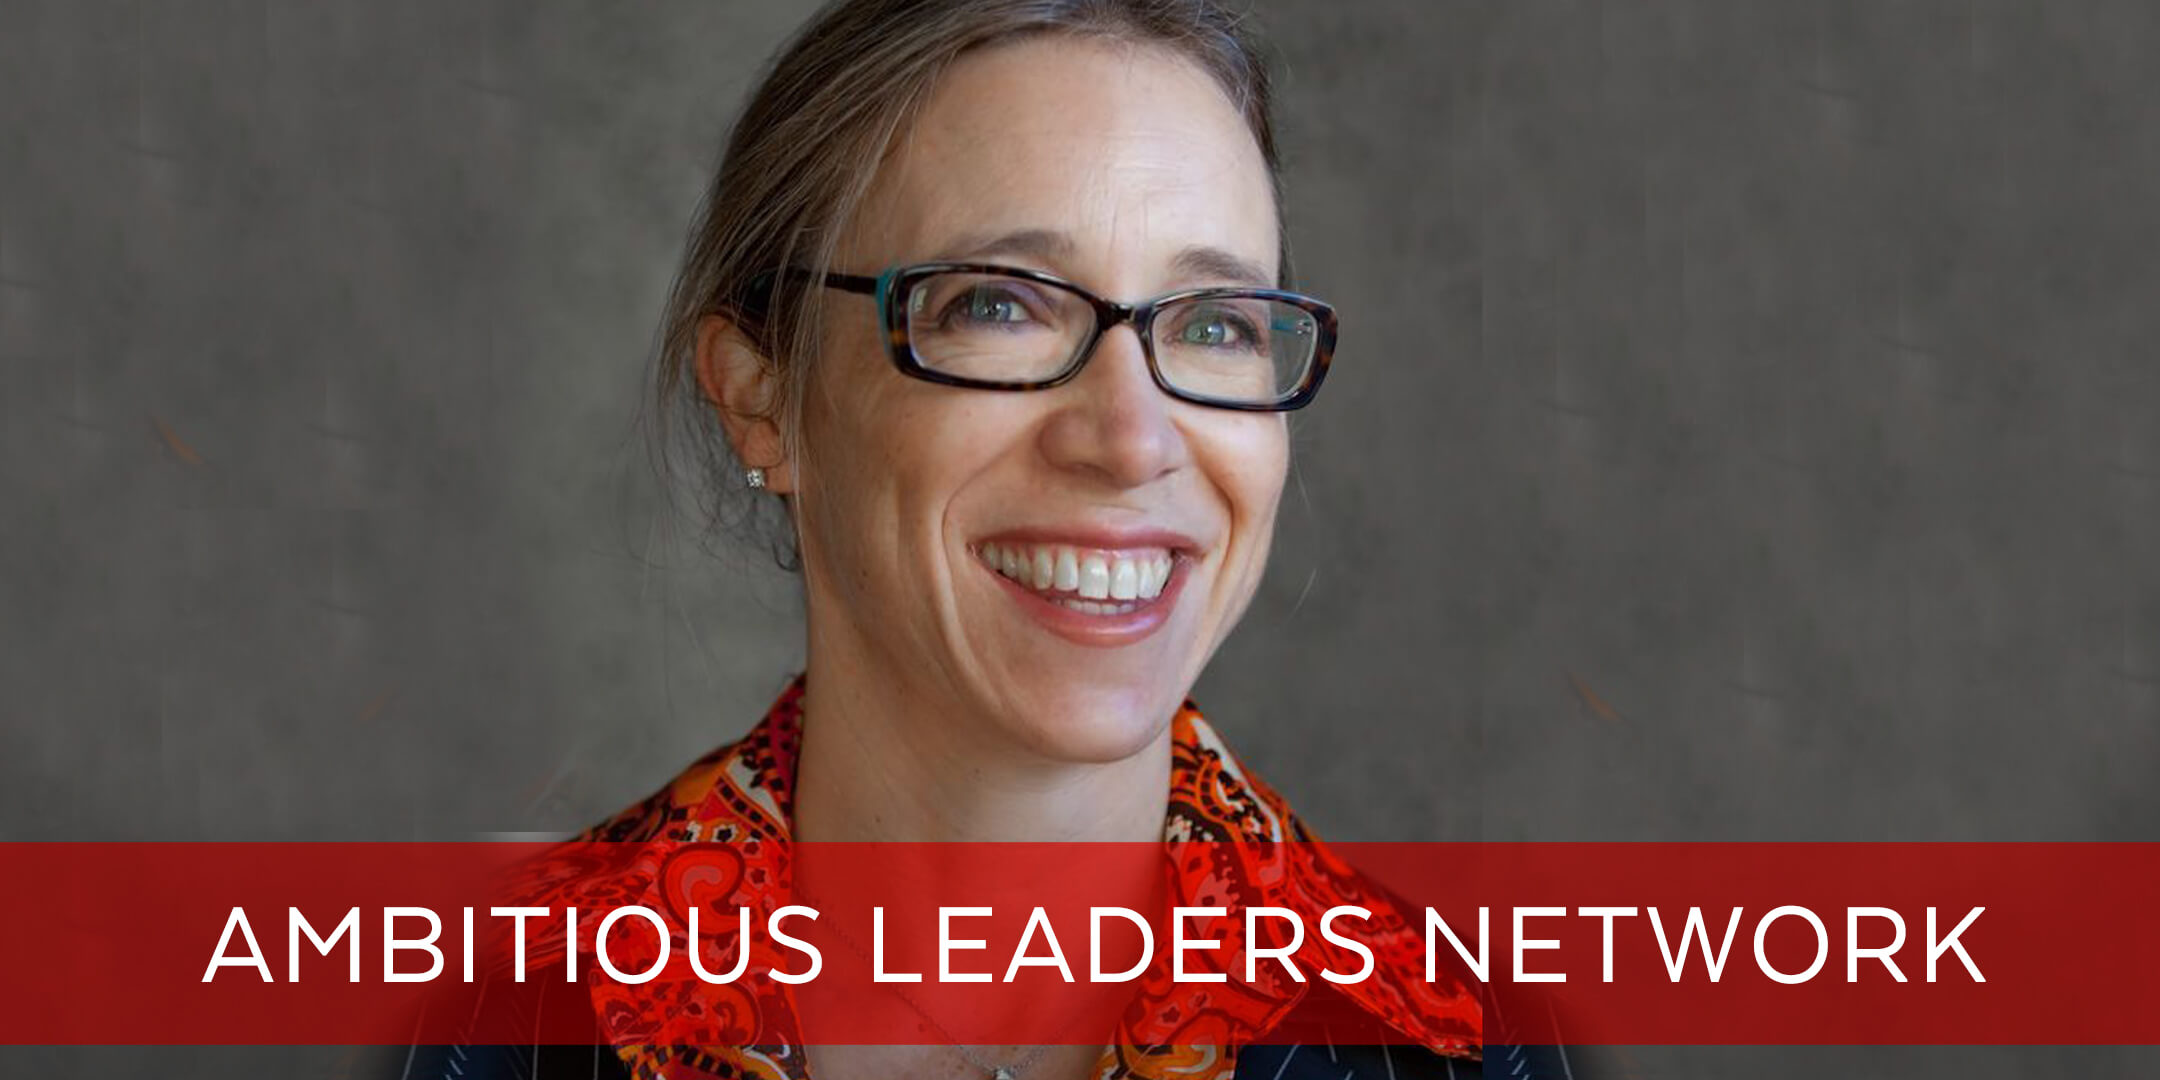 Michelle Ash - Speaker At The Ambitious Leaders Network